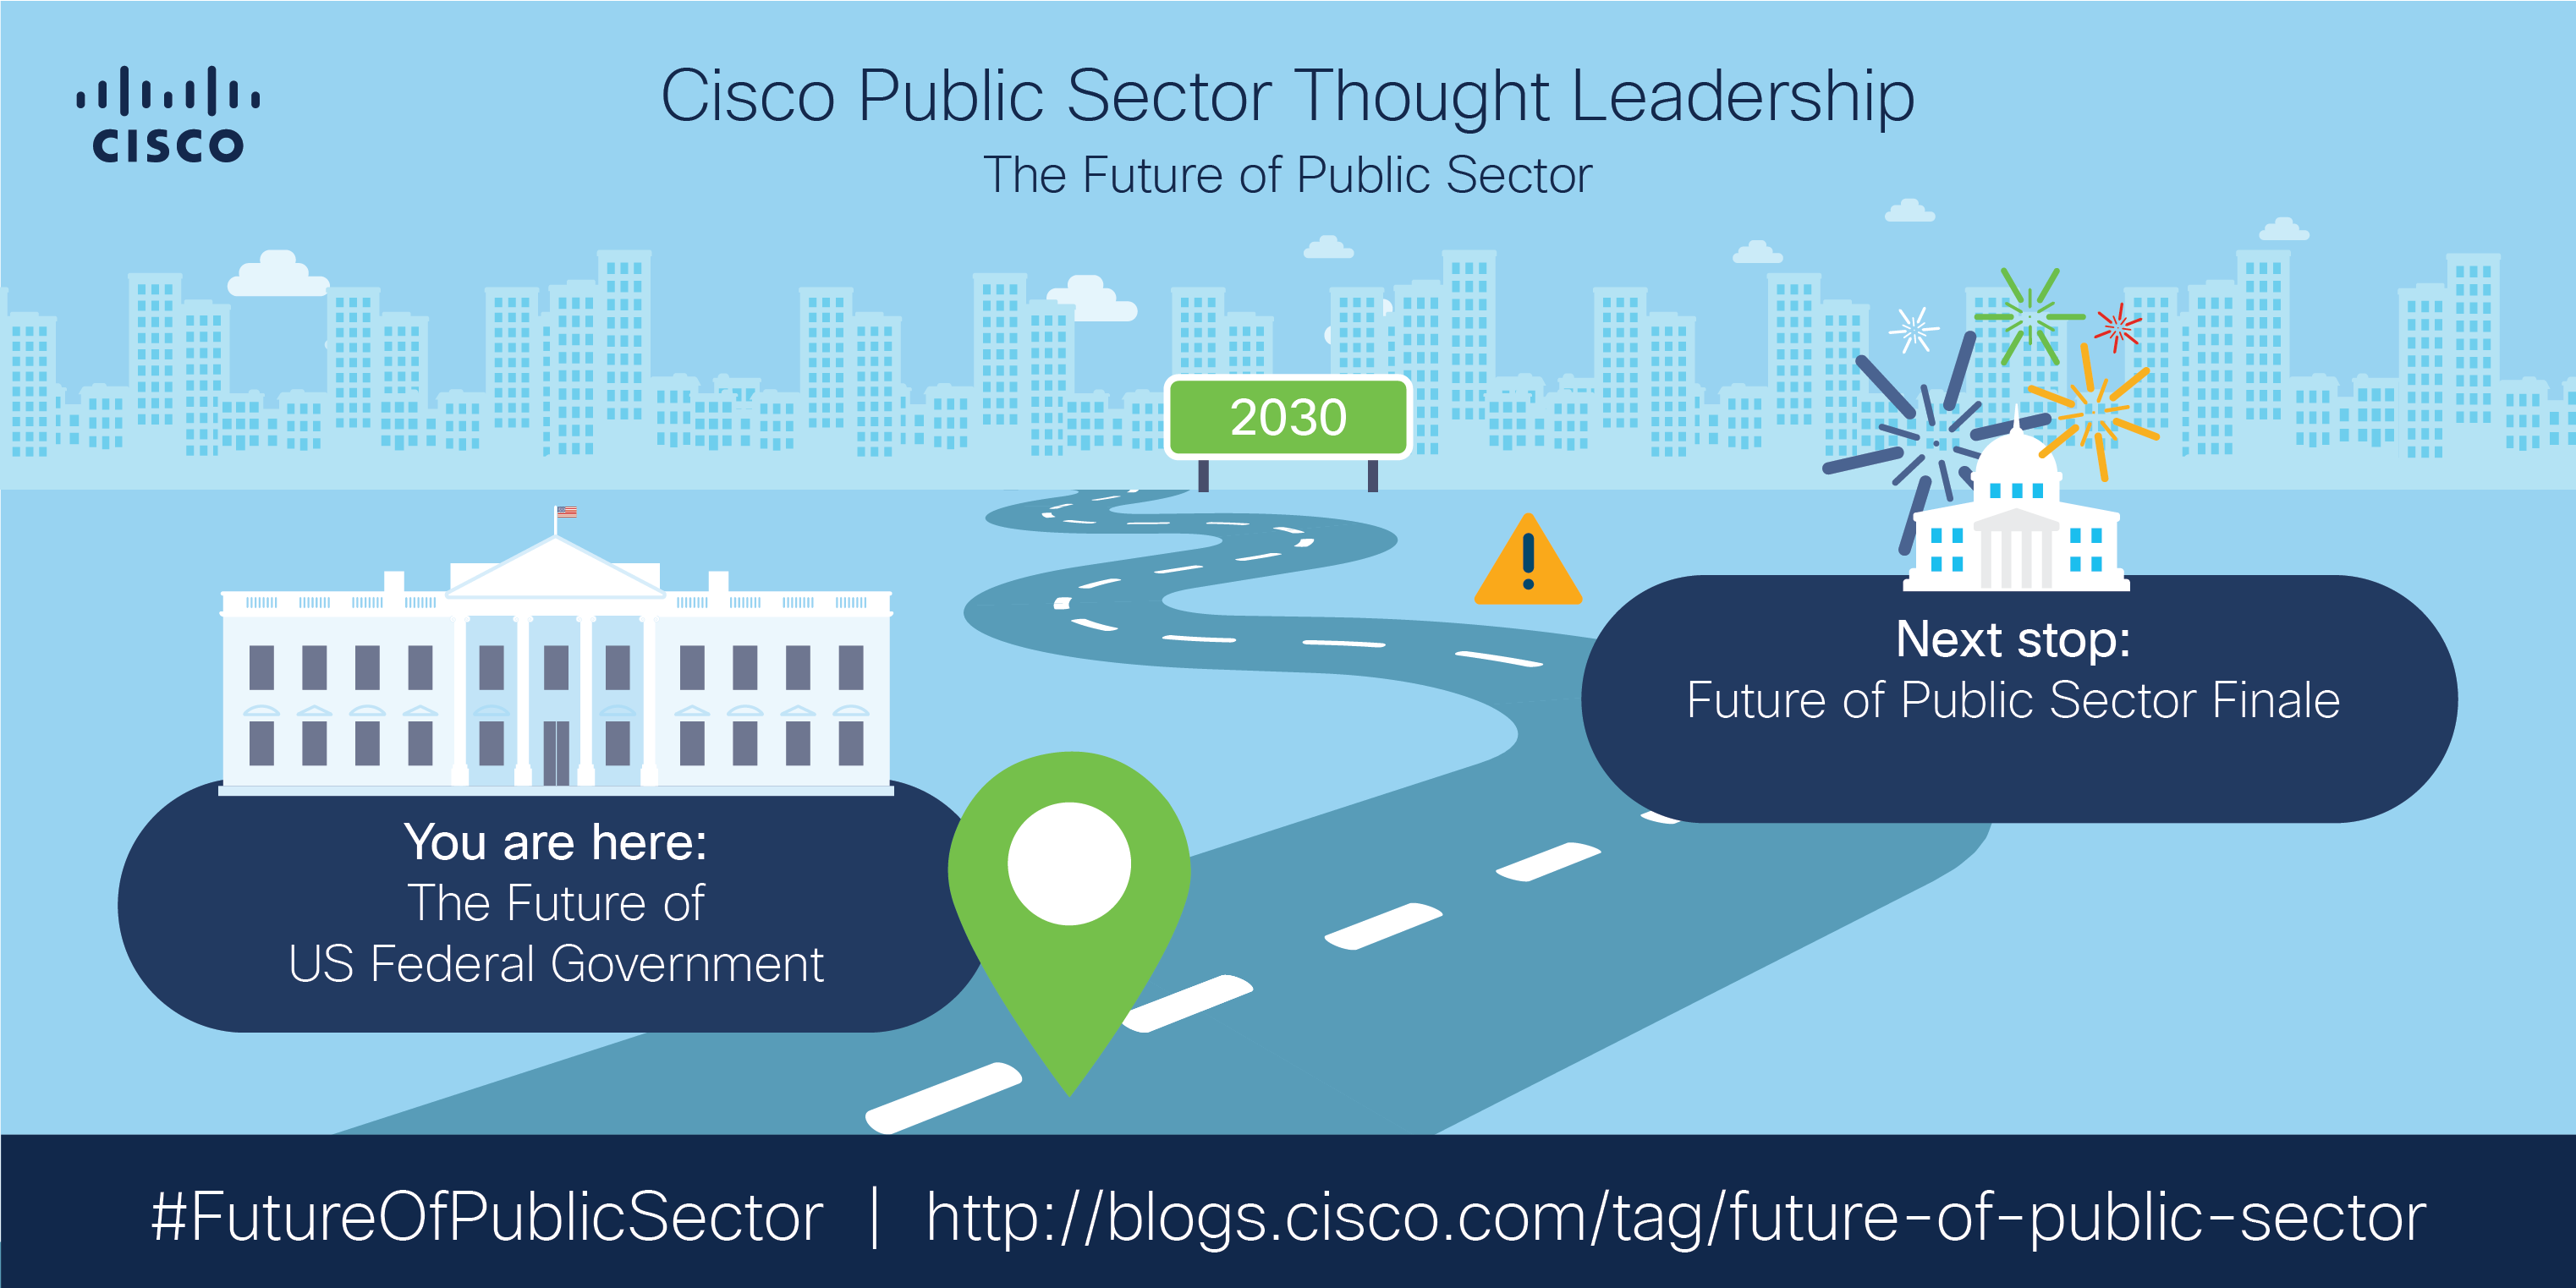 next stop is the future of public sector finale